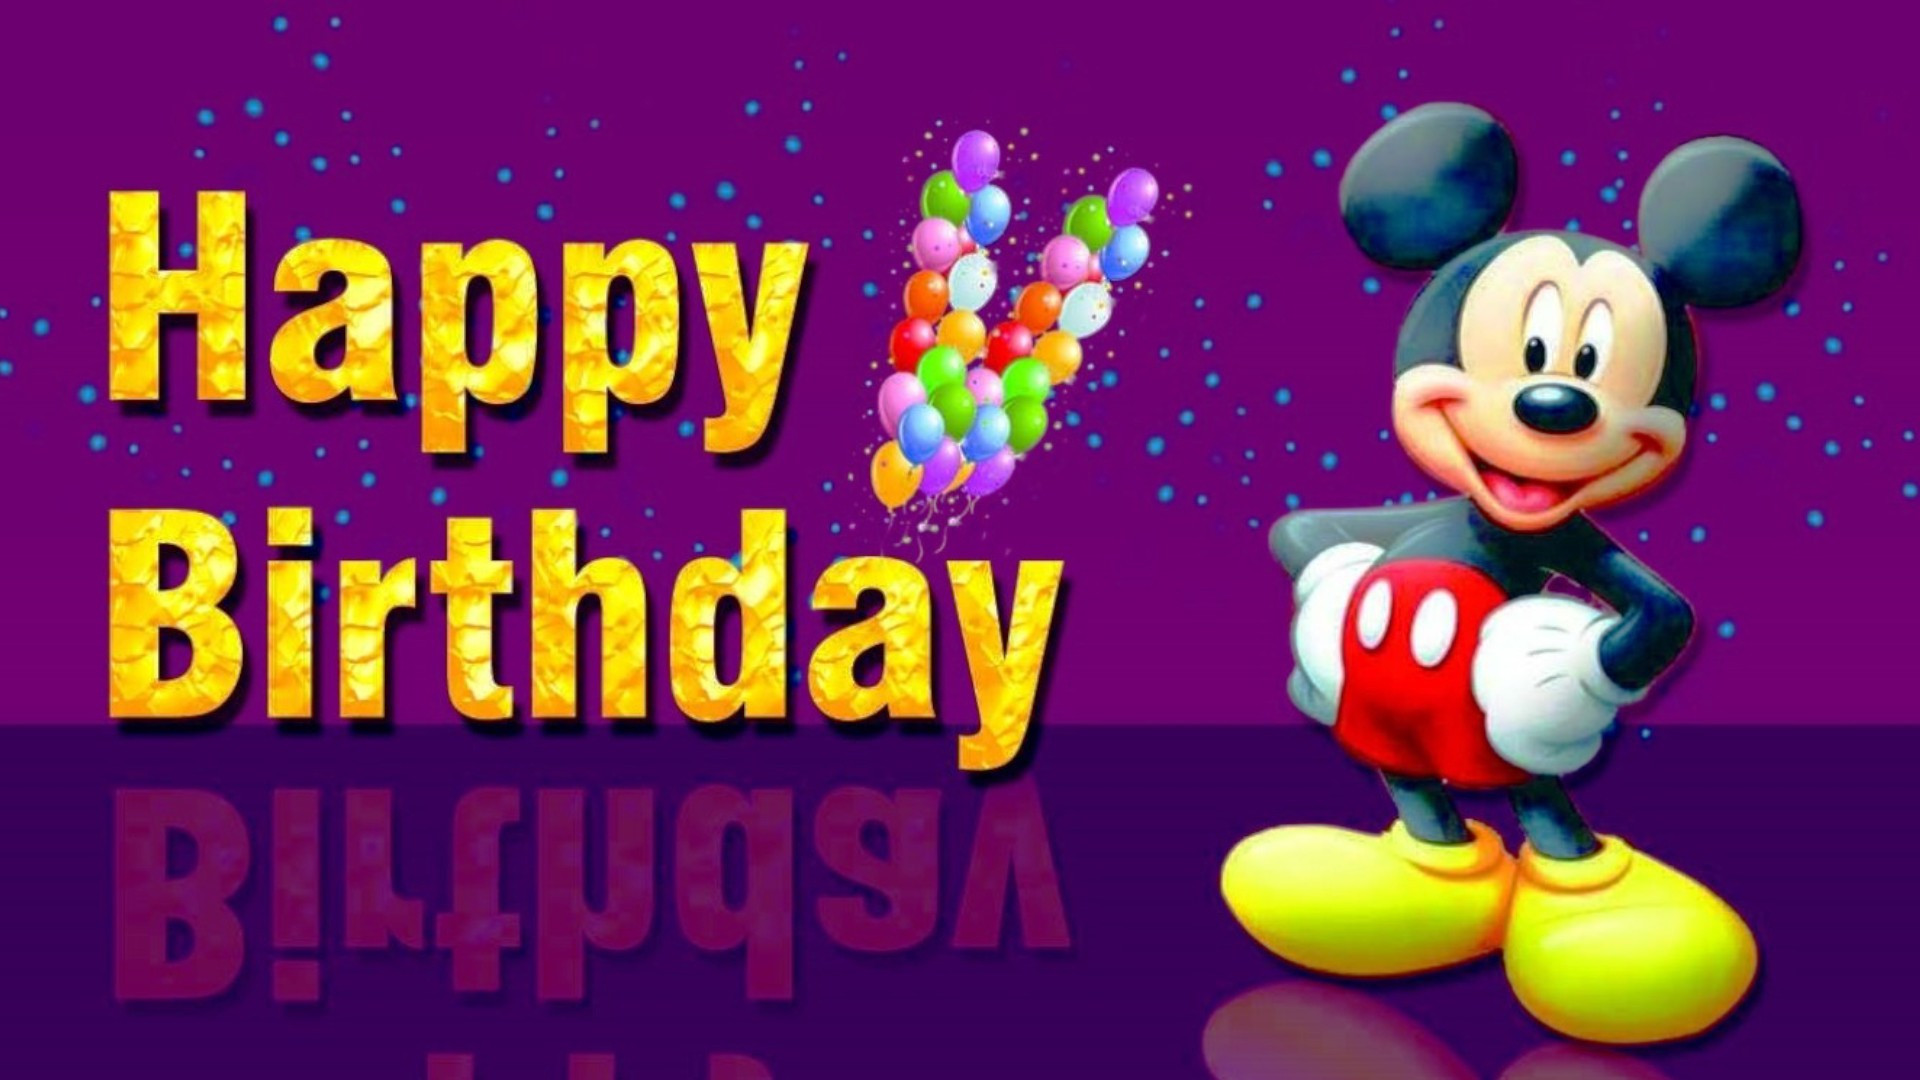 Happy Birthday Wishes Images Free Download
 Happy Birthday Wallpapers & s for Whatsapp